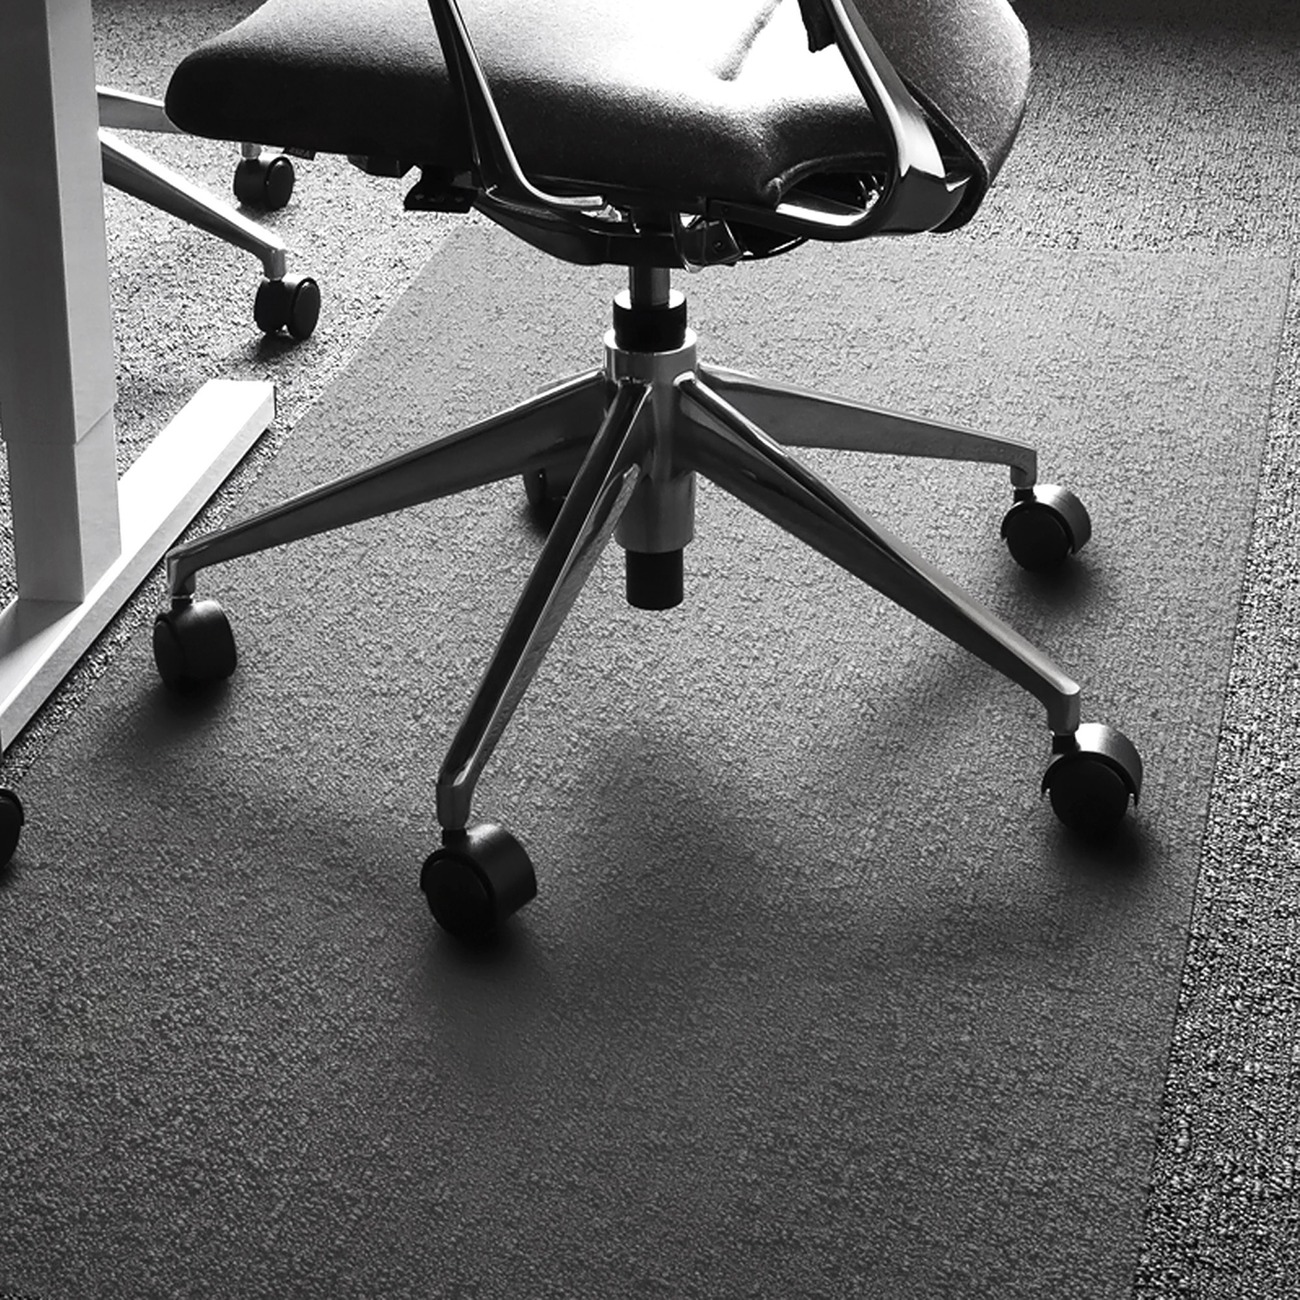 Deflecto Ergonomic Sit-Stand Chair Mat for Multi-surface